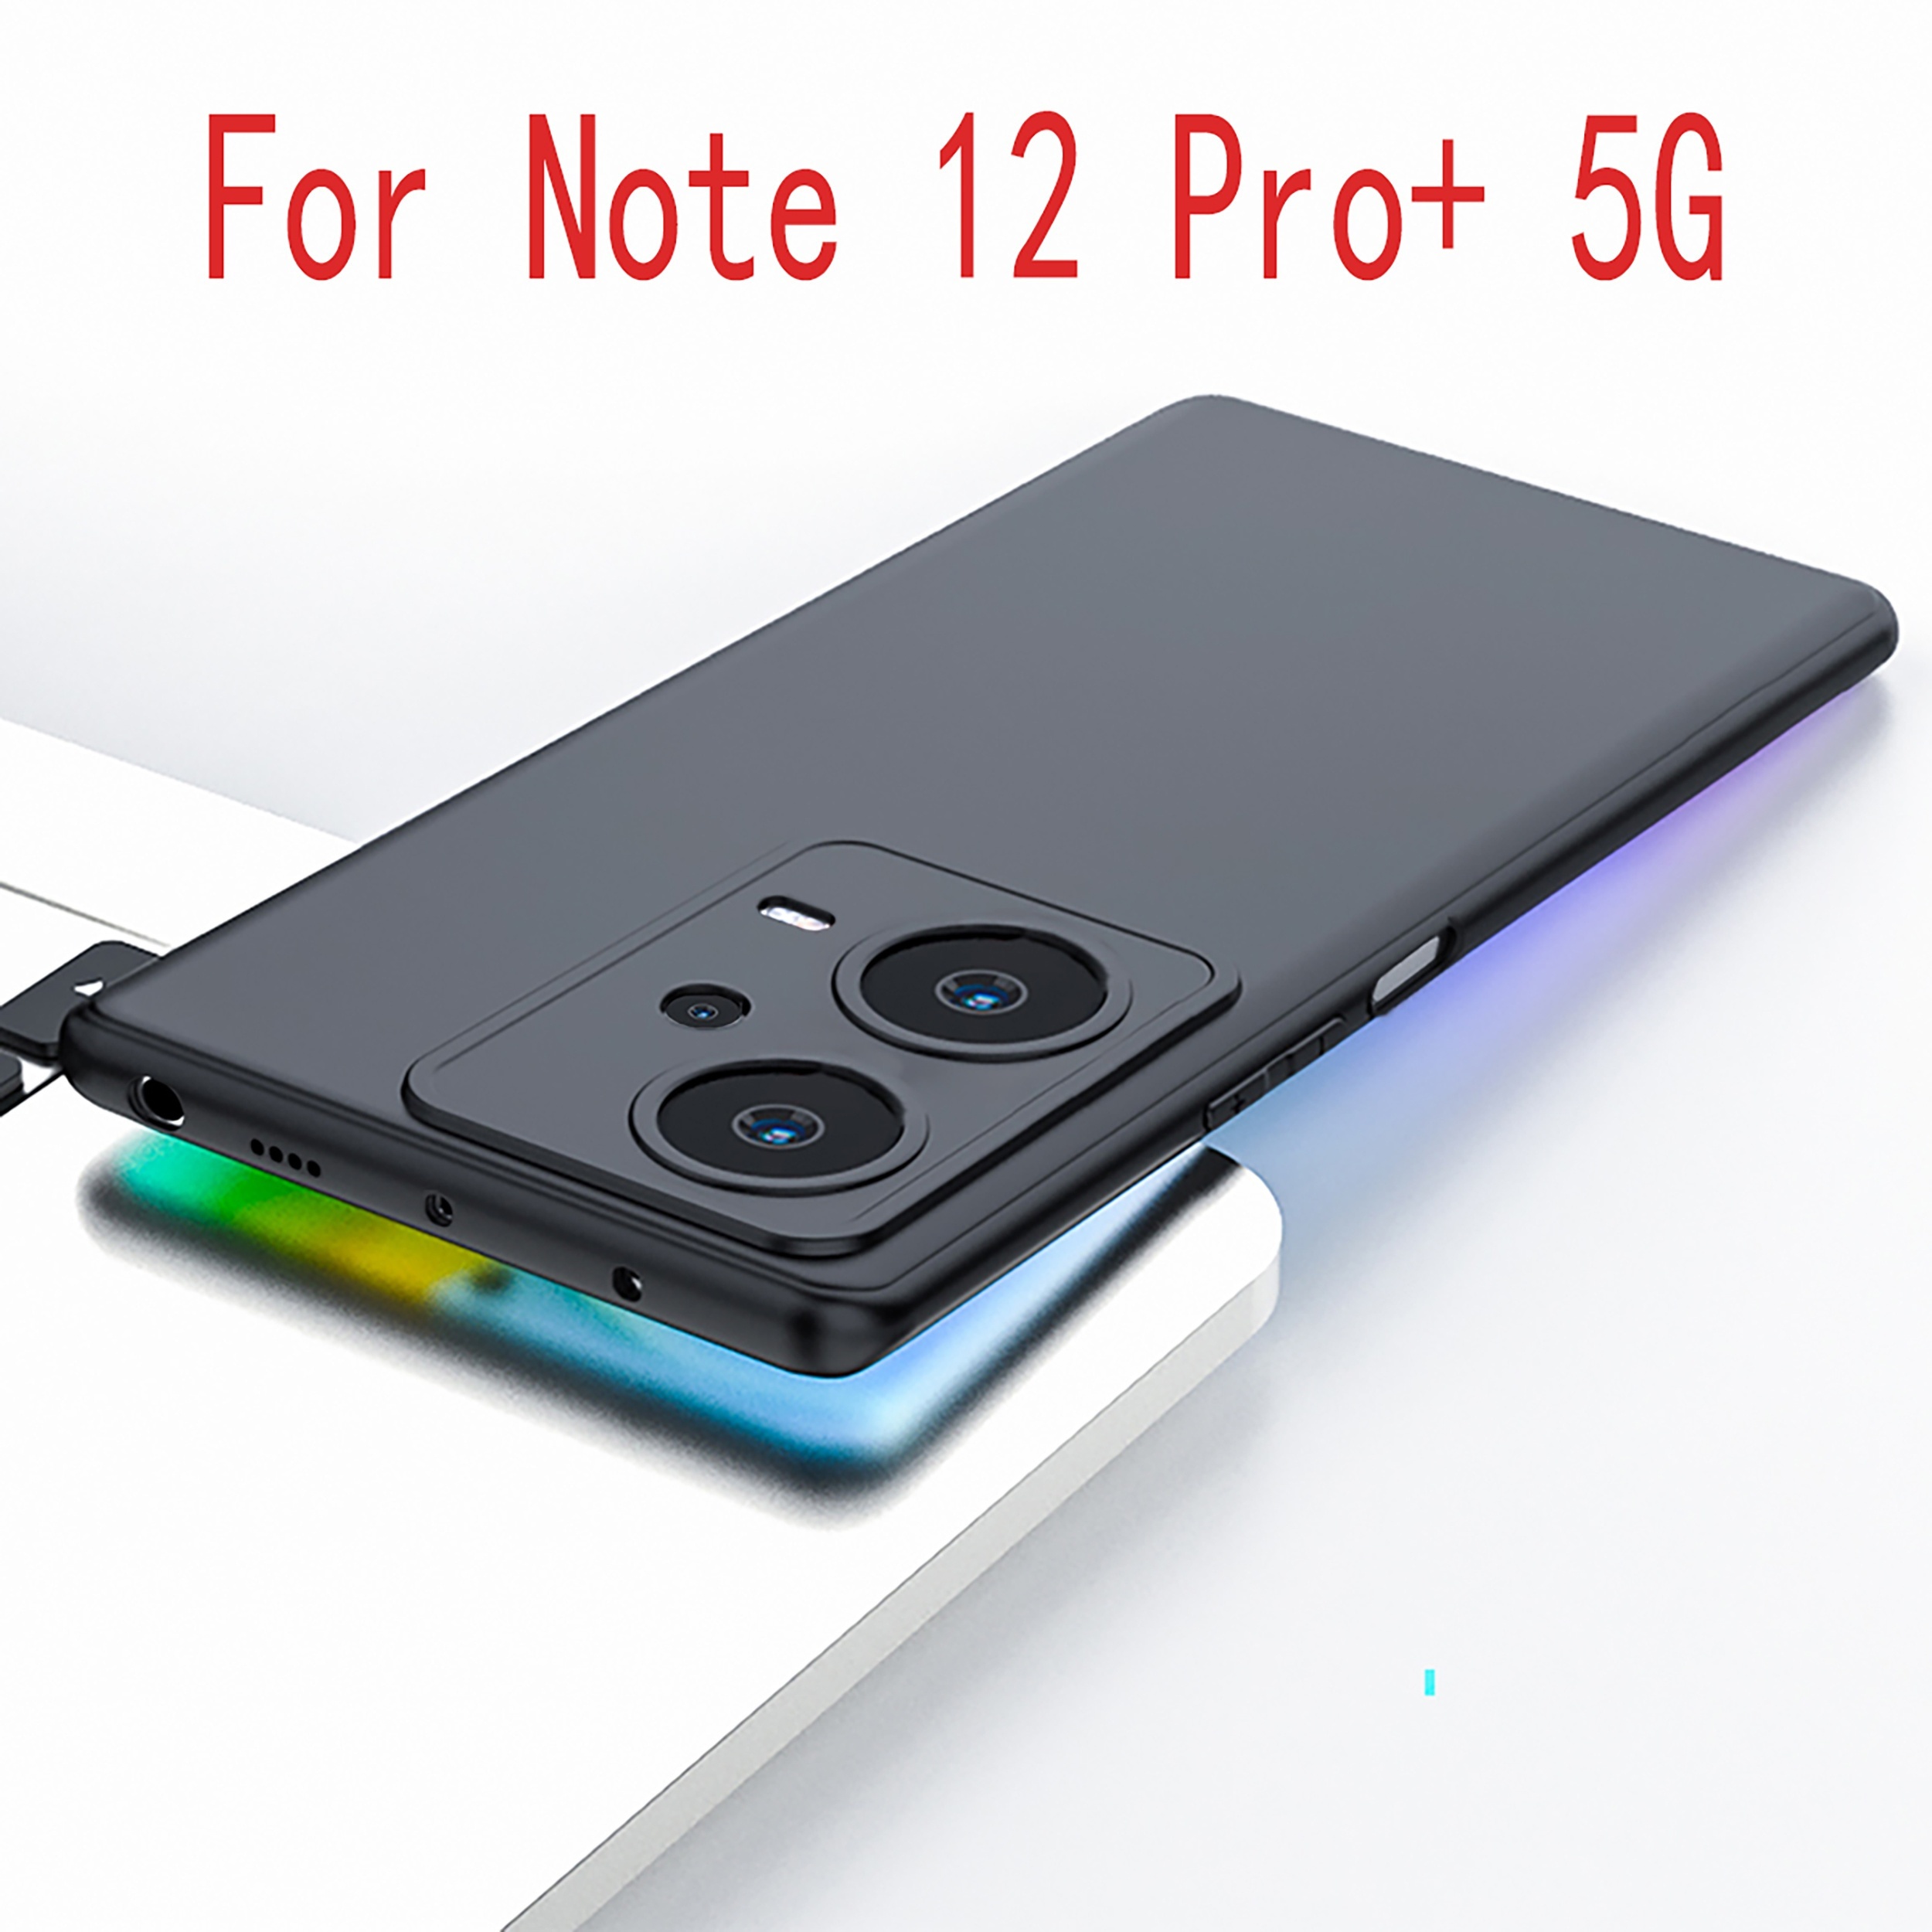 Slim Thin Black Case for Xiaomi Redmi 13C 4G, Soft Protective Cover  Protection